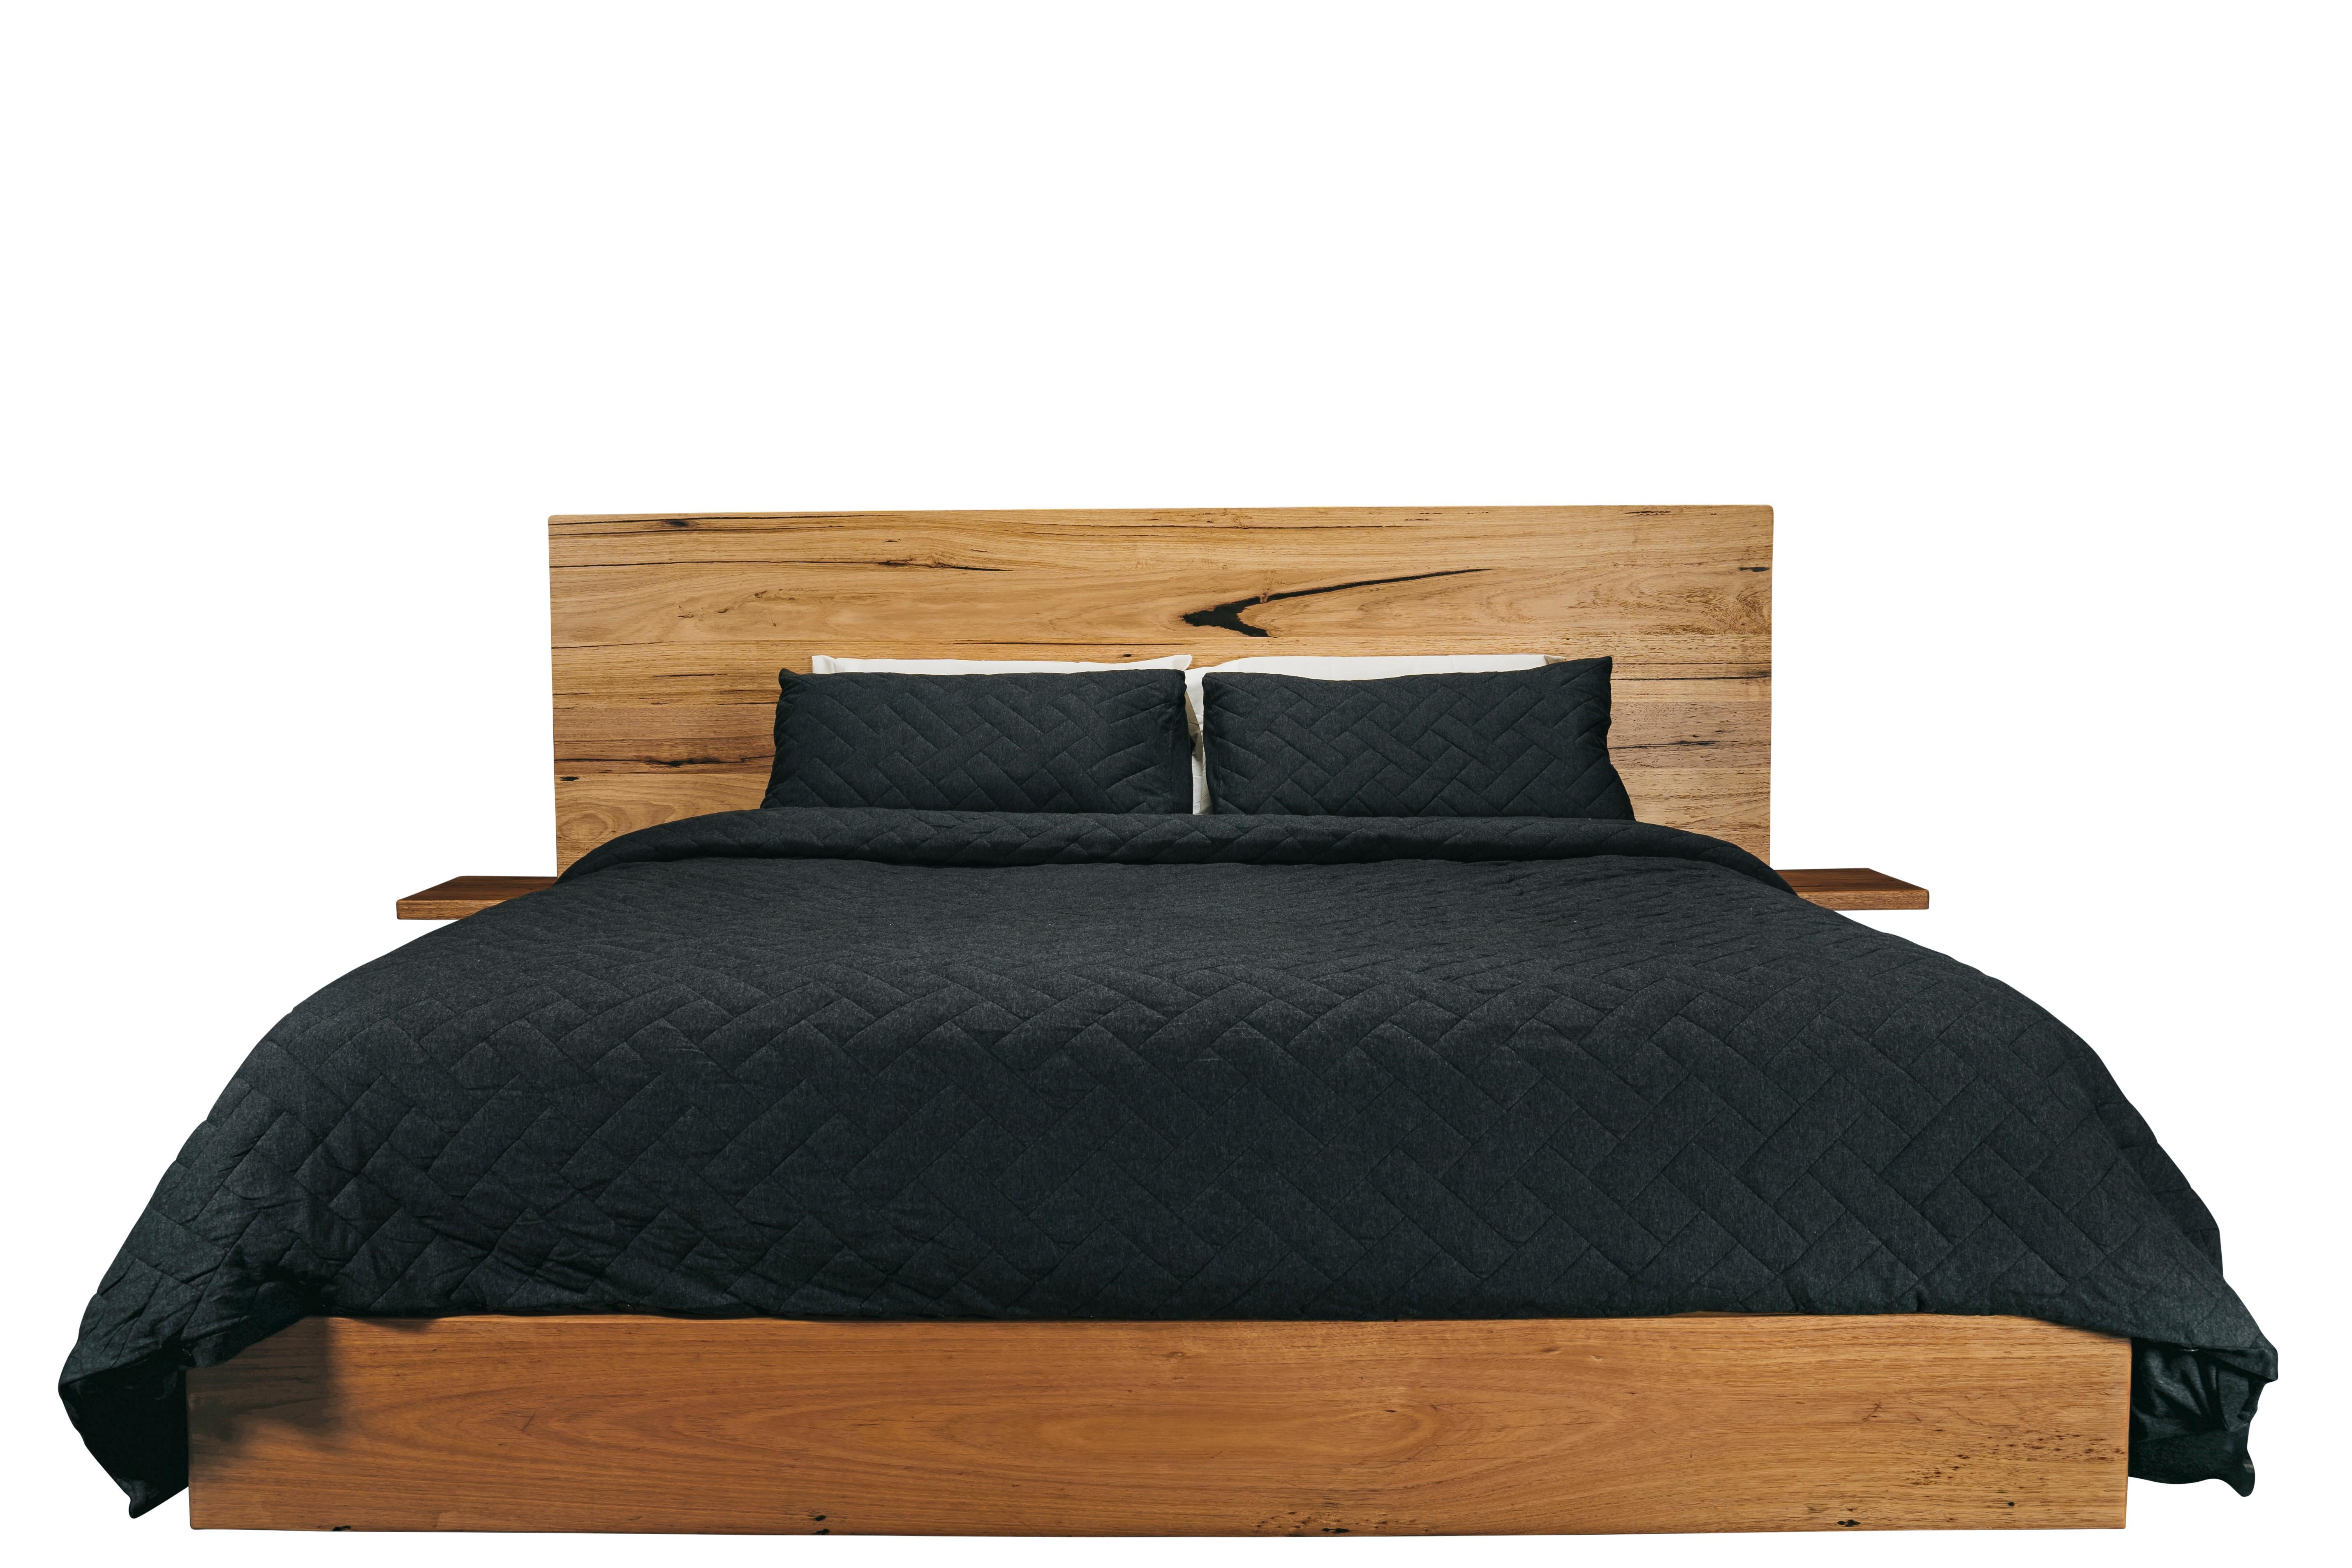 A statement piece in any bedroom. Featuring built-in floating bedside tables, a solid bedhead, routed side grooves and solid mattress base for superior strength and durability, it’s as functional as it is beautiful.

Available in king-queen-double &